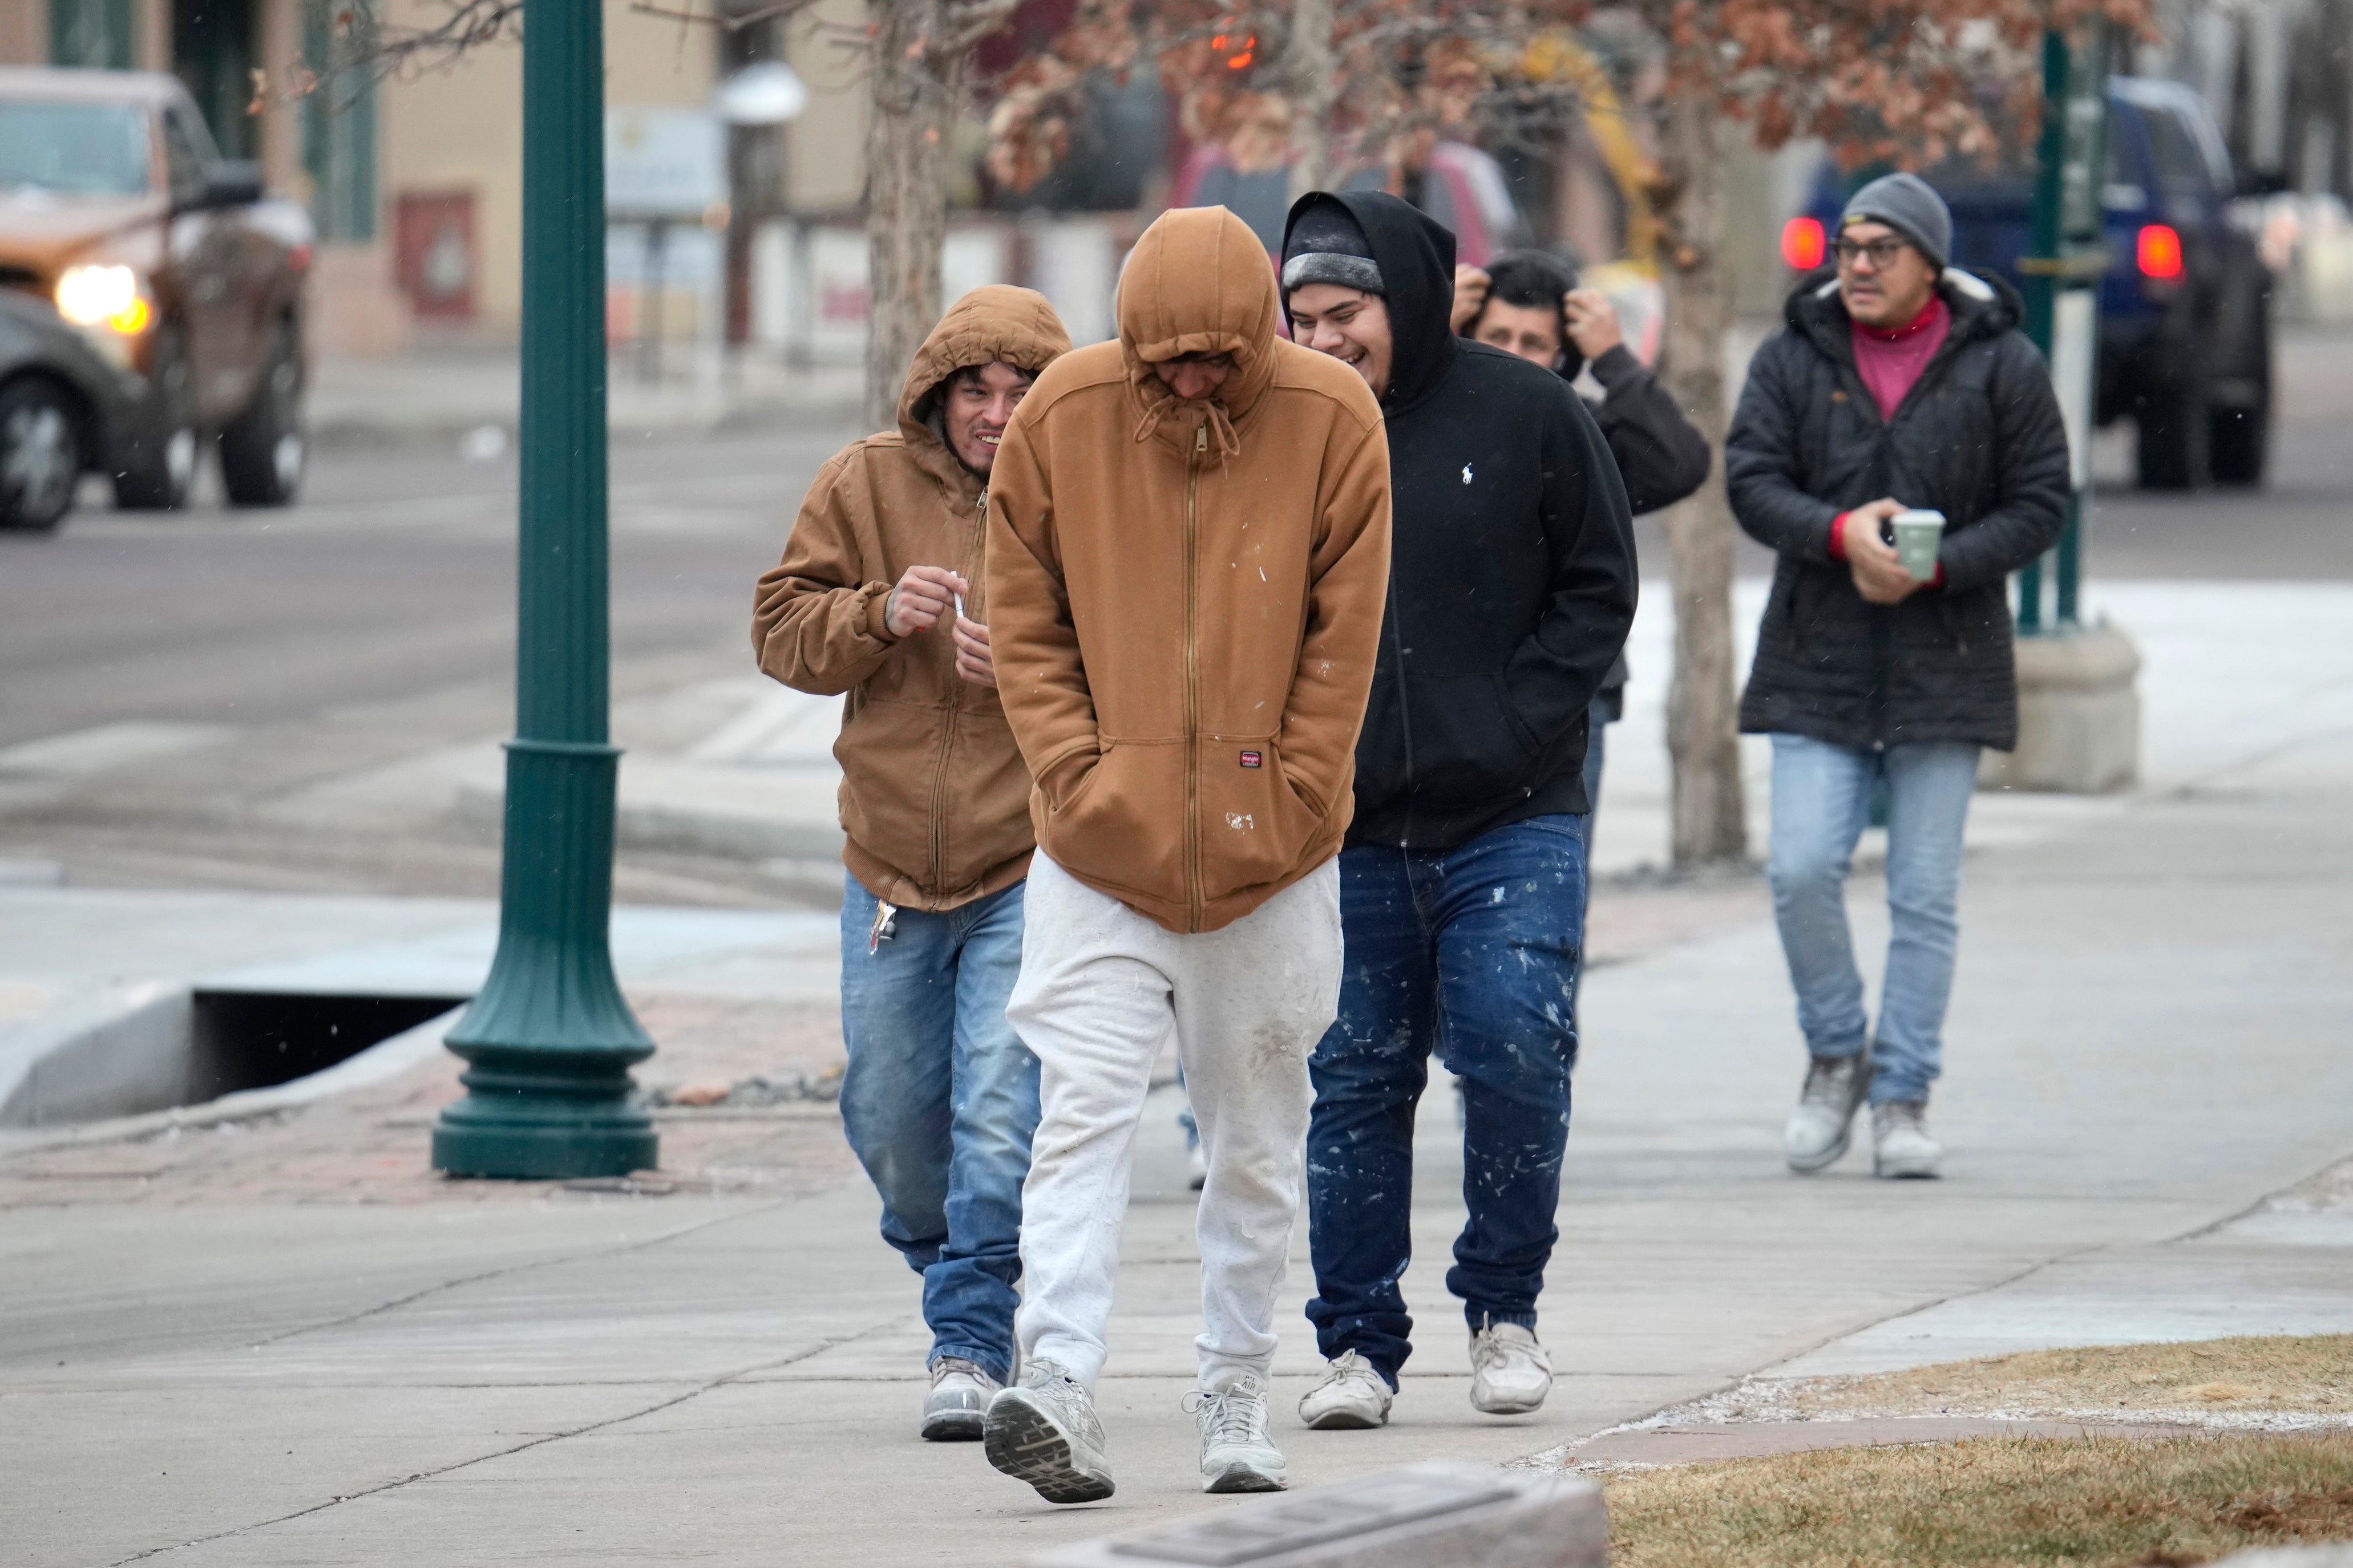 Pedestrians struggle to keep warm while walking along Tejon Street as temperatures hovered in the single digits after a winter storm packing light snow and high winds rolled into the Pikes Peak region on Wednesday Colorado Springs, Colorado (AP Photo/David Zalubowski)